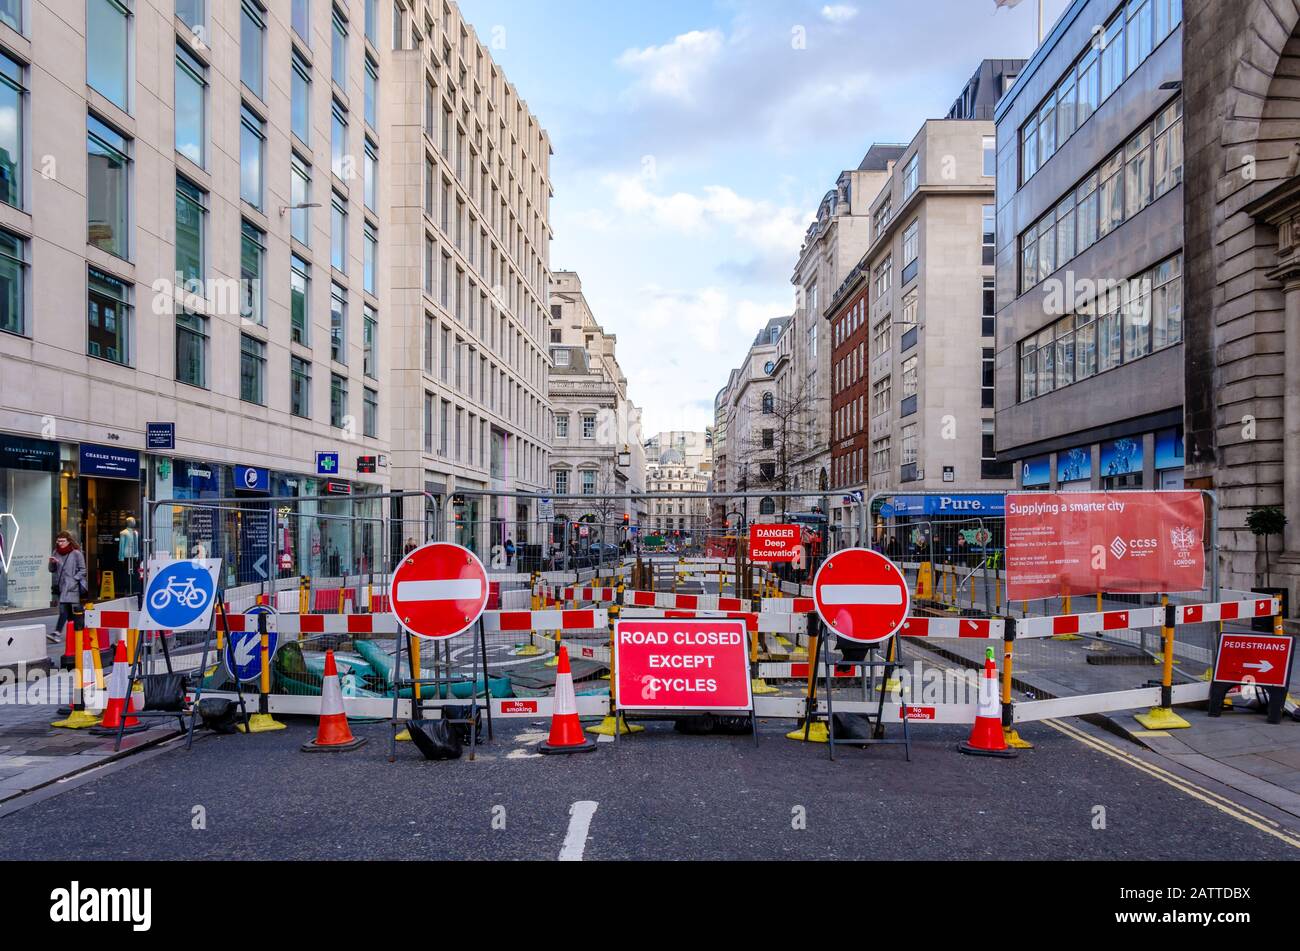 A London street is closed because of engineering works, Lots of red signs and barriers surround the roadworks. Stock Photo